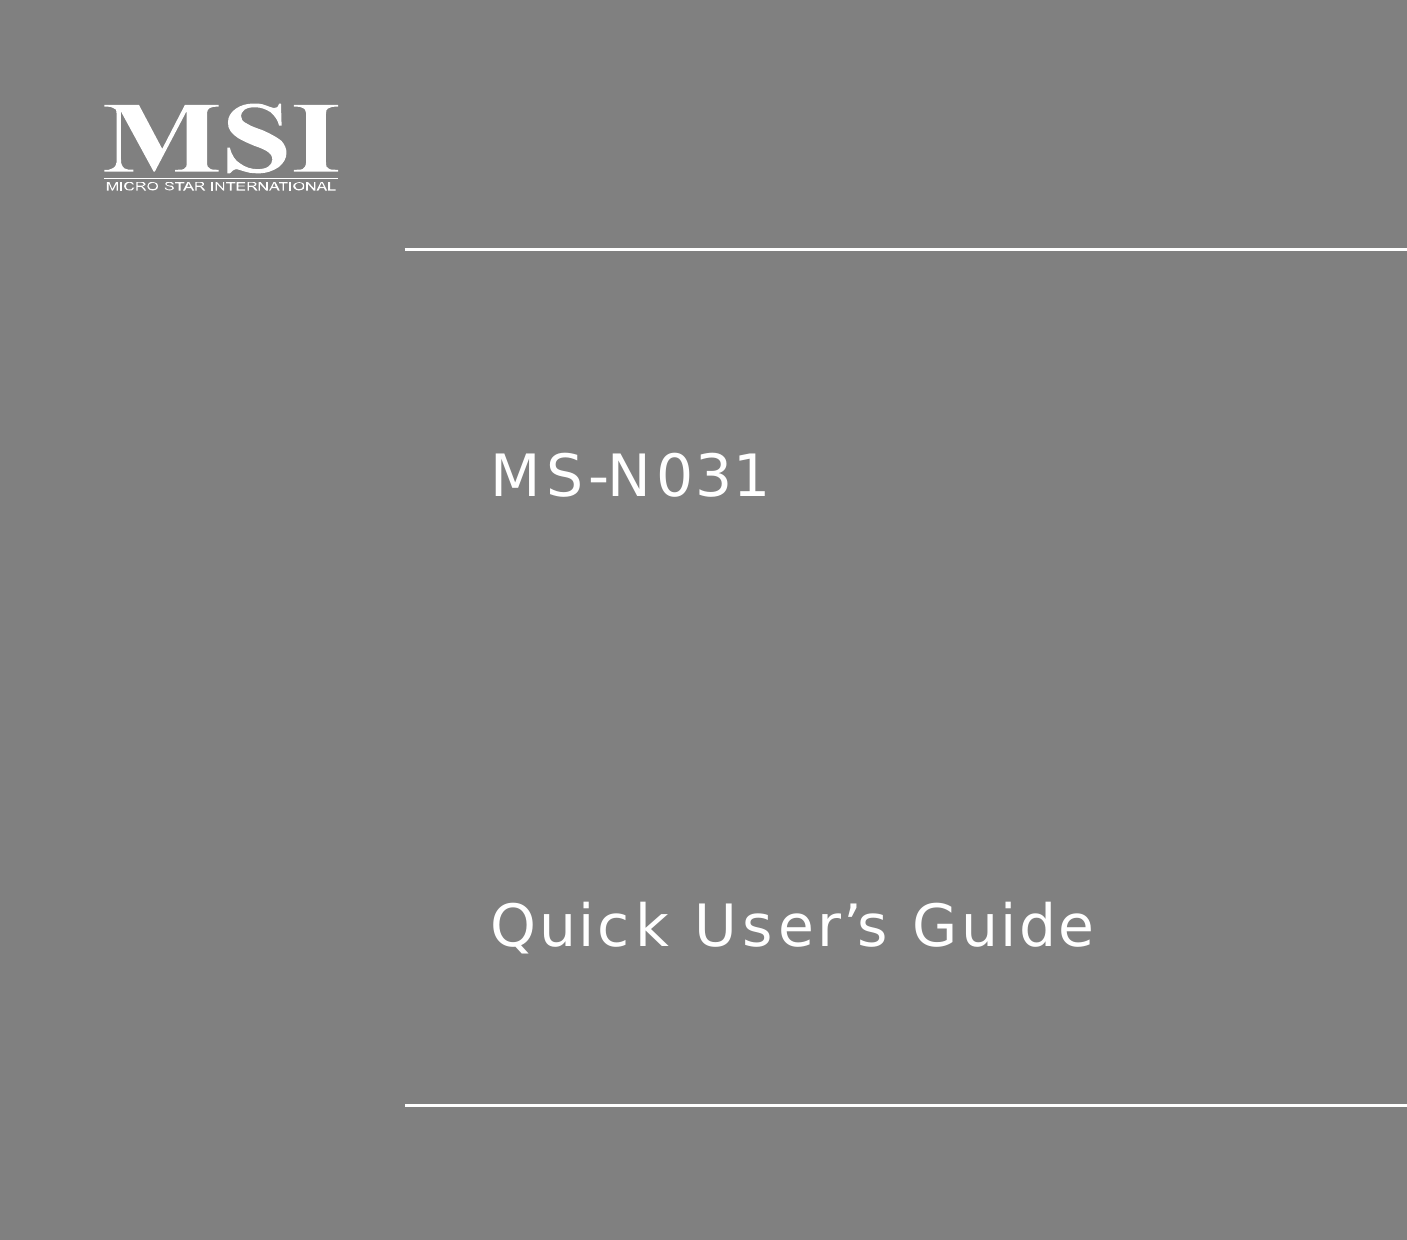      MS-N031     Quick User’s Guide   